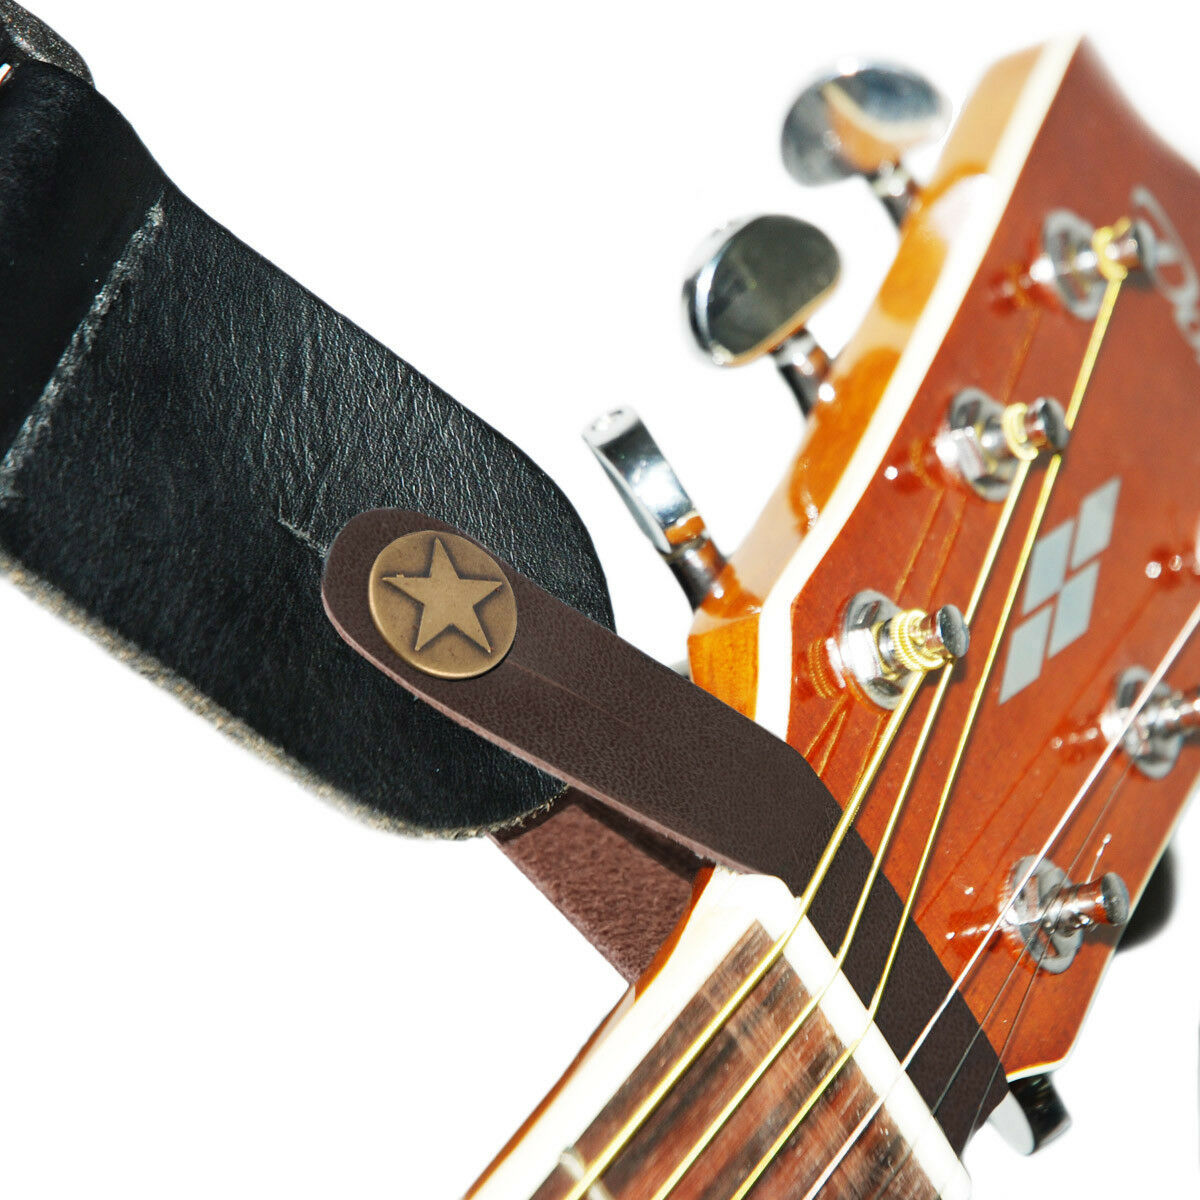 Genuine Leather Guitar Strap Button For Acoustic / Folk / Classic Guitar Brown